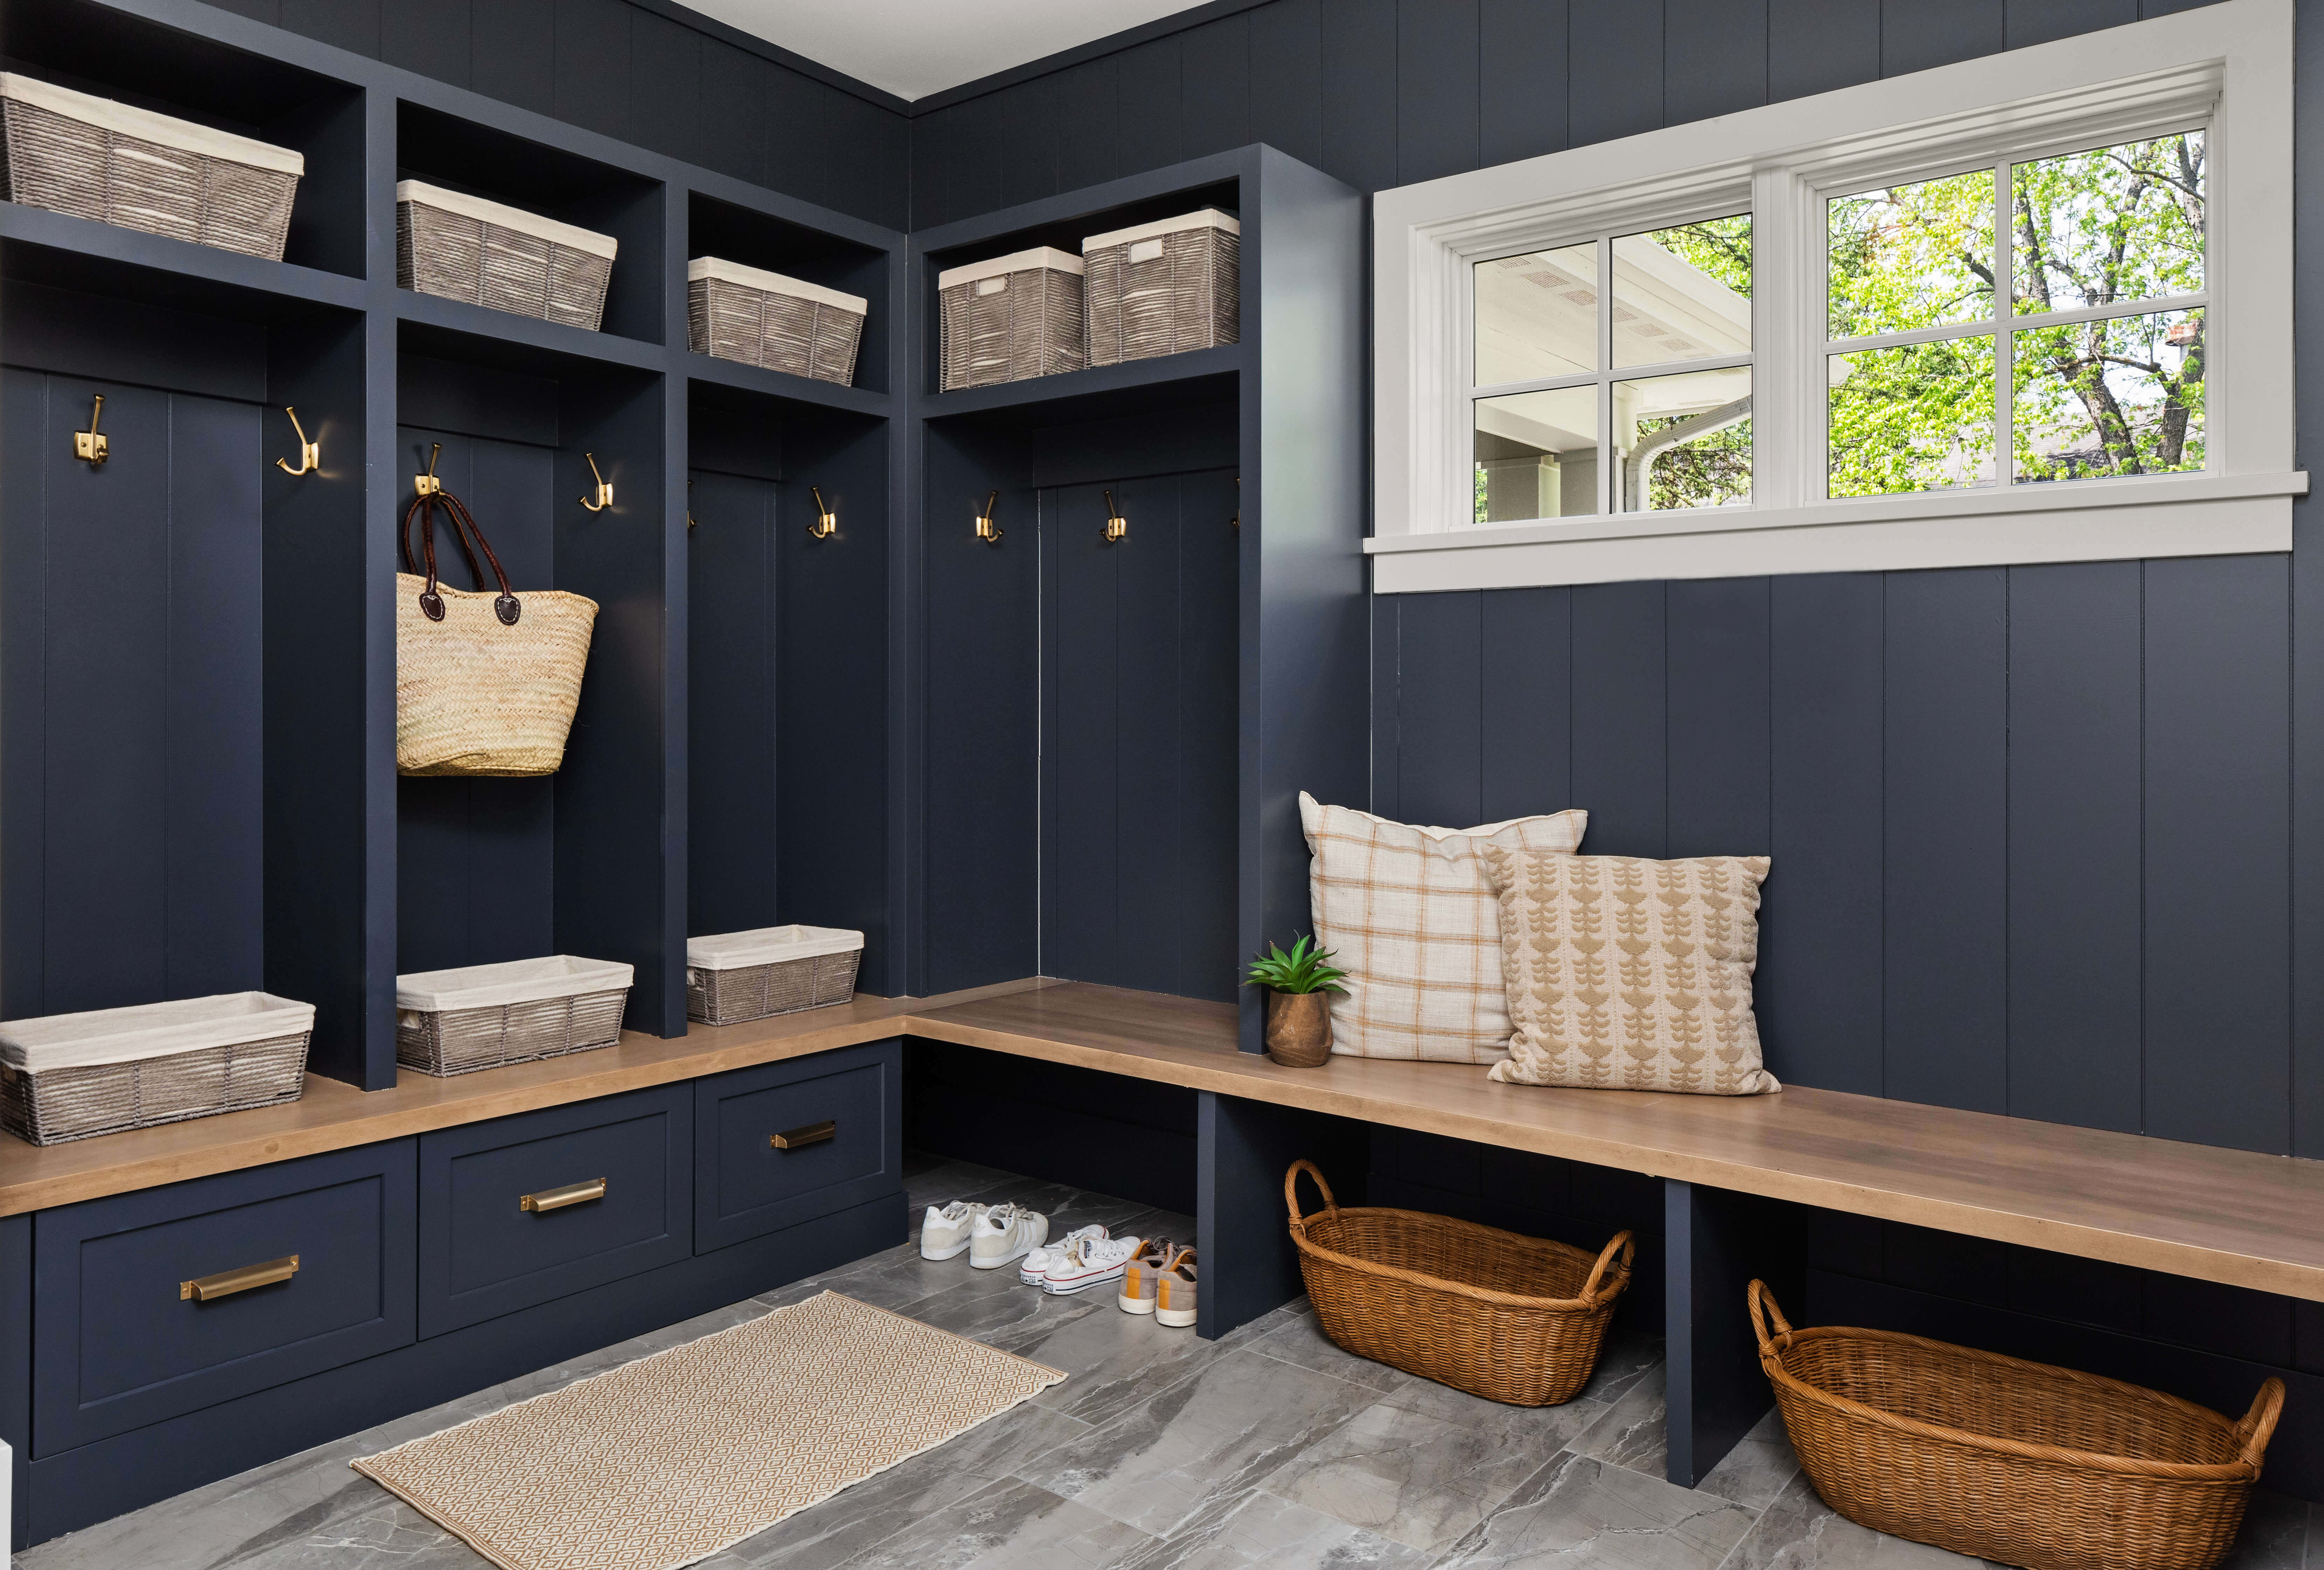 A nautical styled mudroom entryway with dark navy blue painted locker cabinets and shiplap wall with a light wood stain for the boot bench.